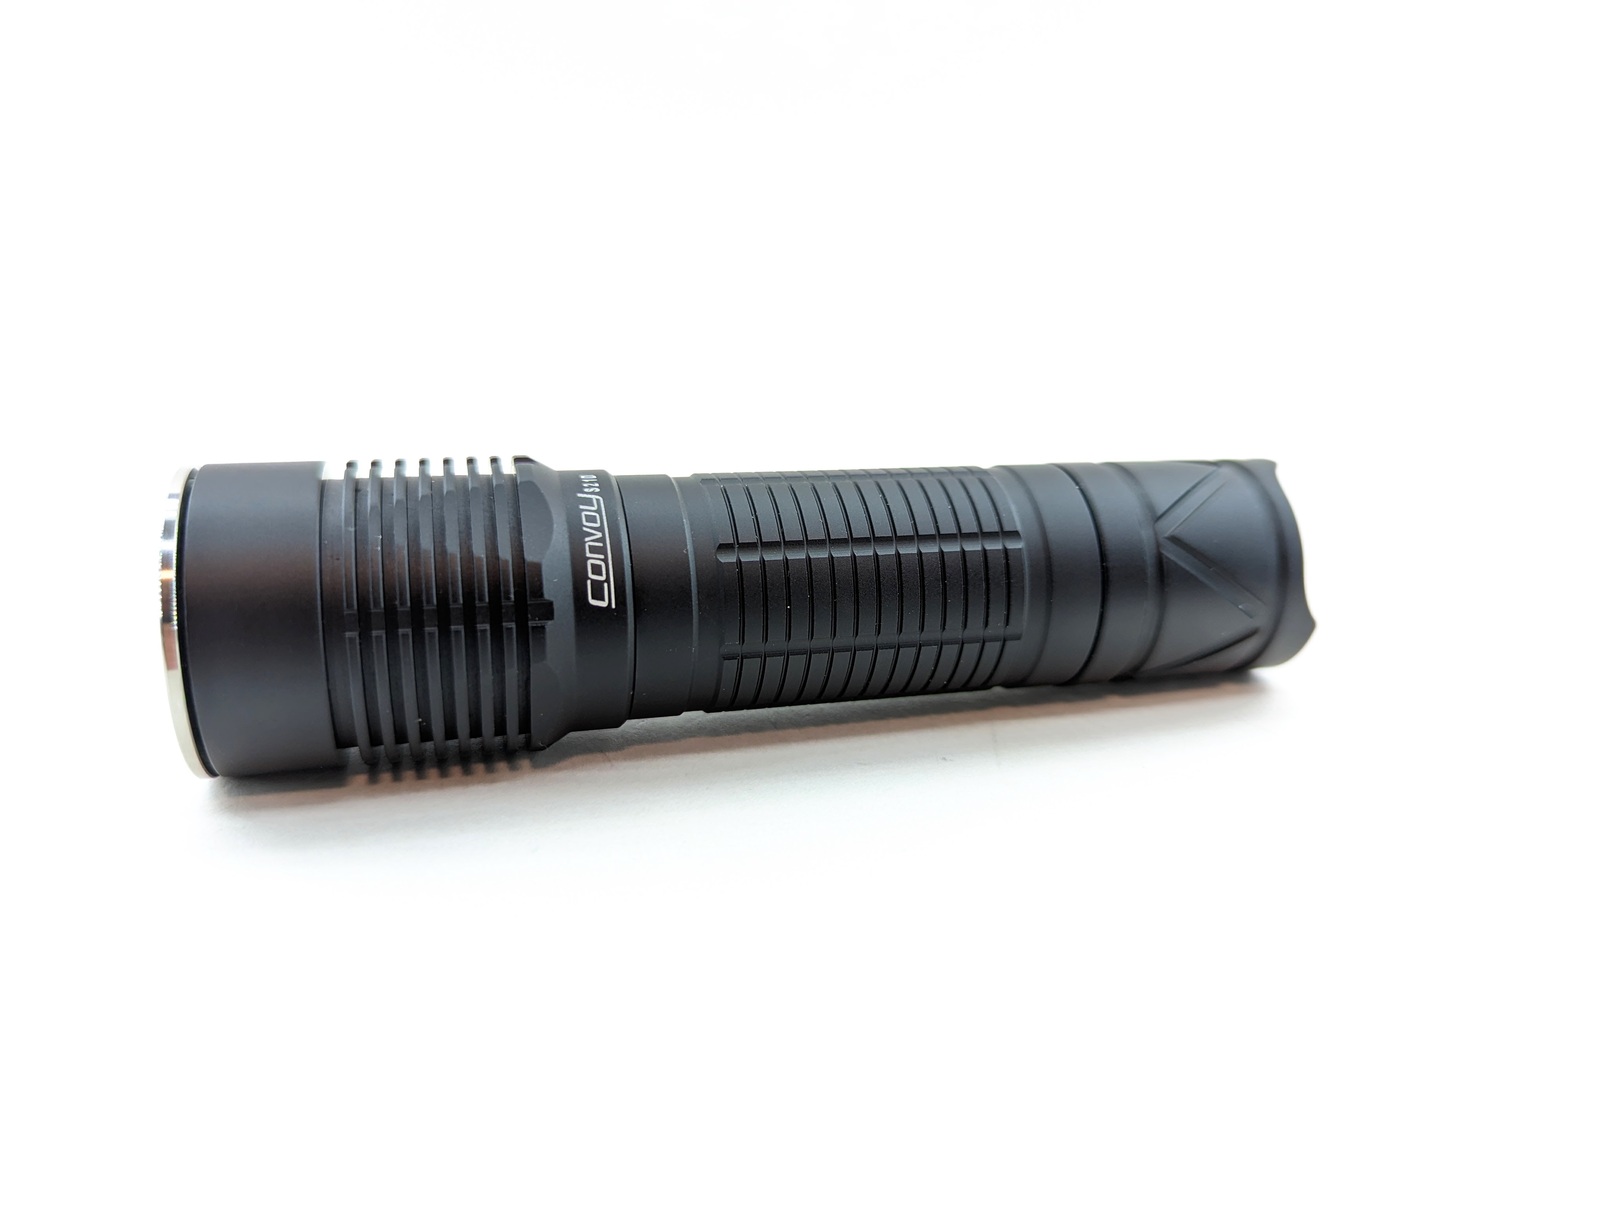 [Review] Convoy S21D - 21700 quad LED clicky - 21700 Flashlights ...